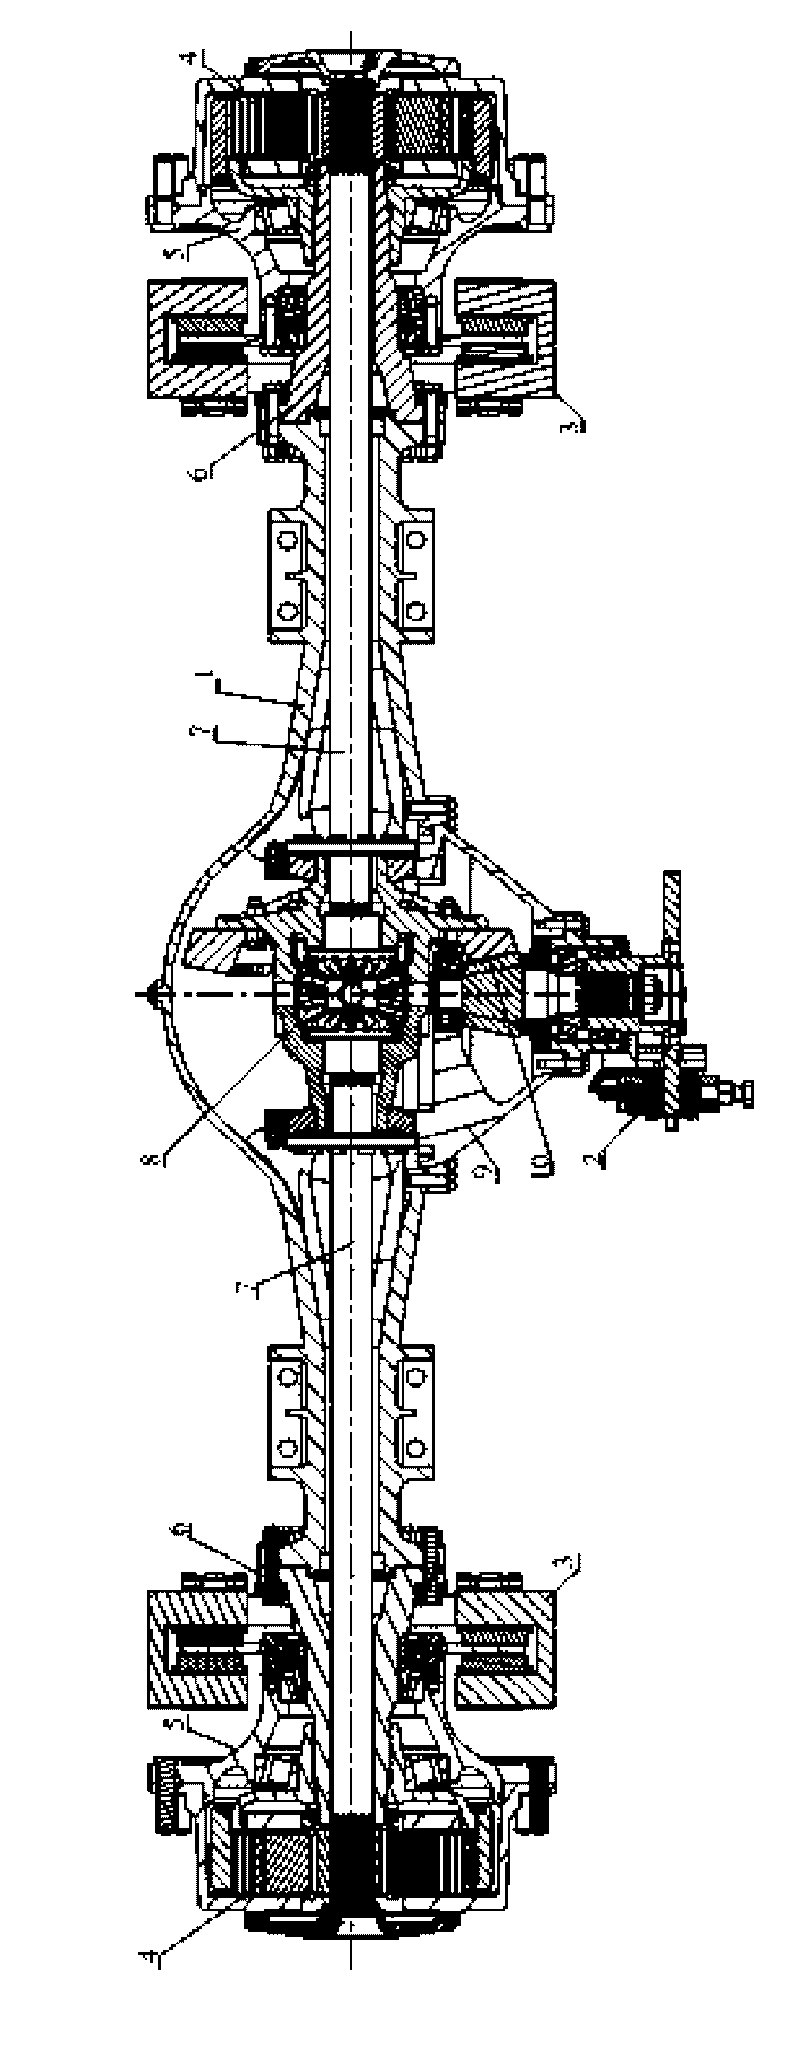 Driving front axle of large-speed ratio mining vehicle